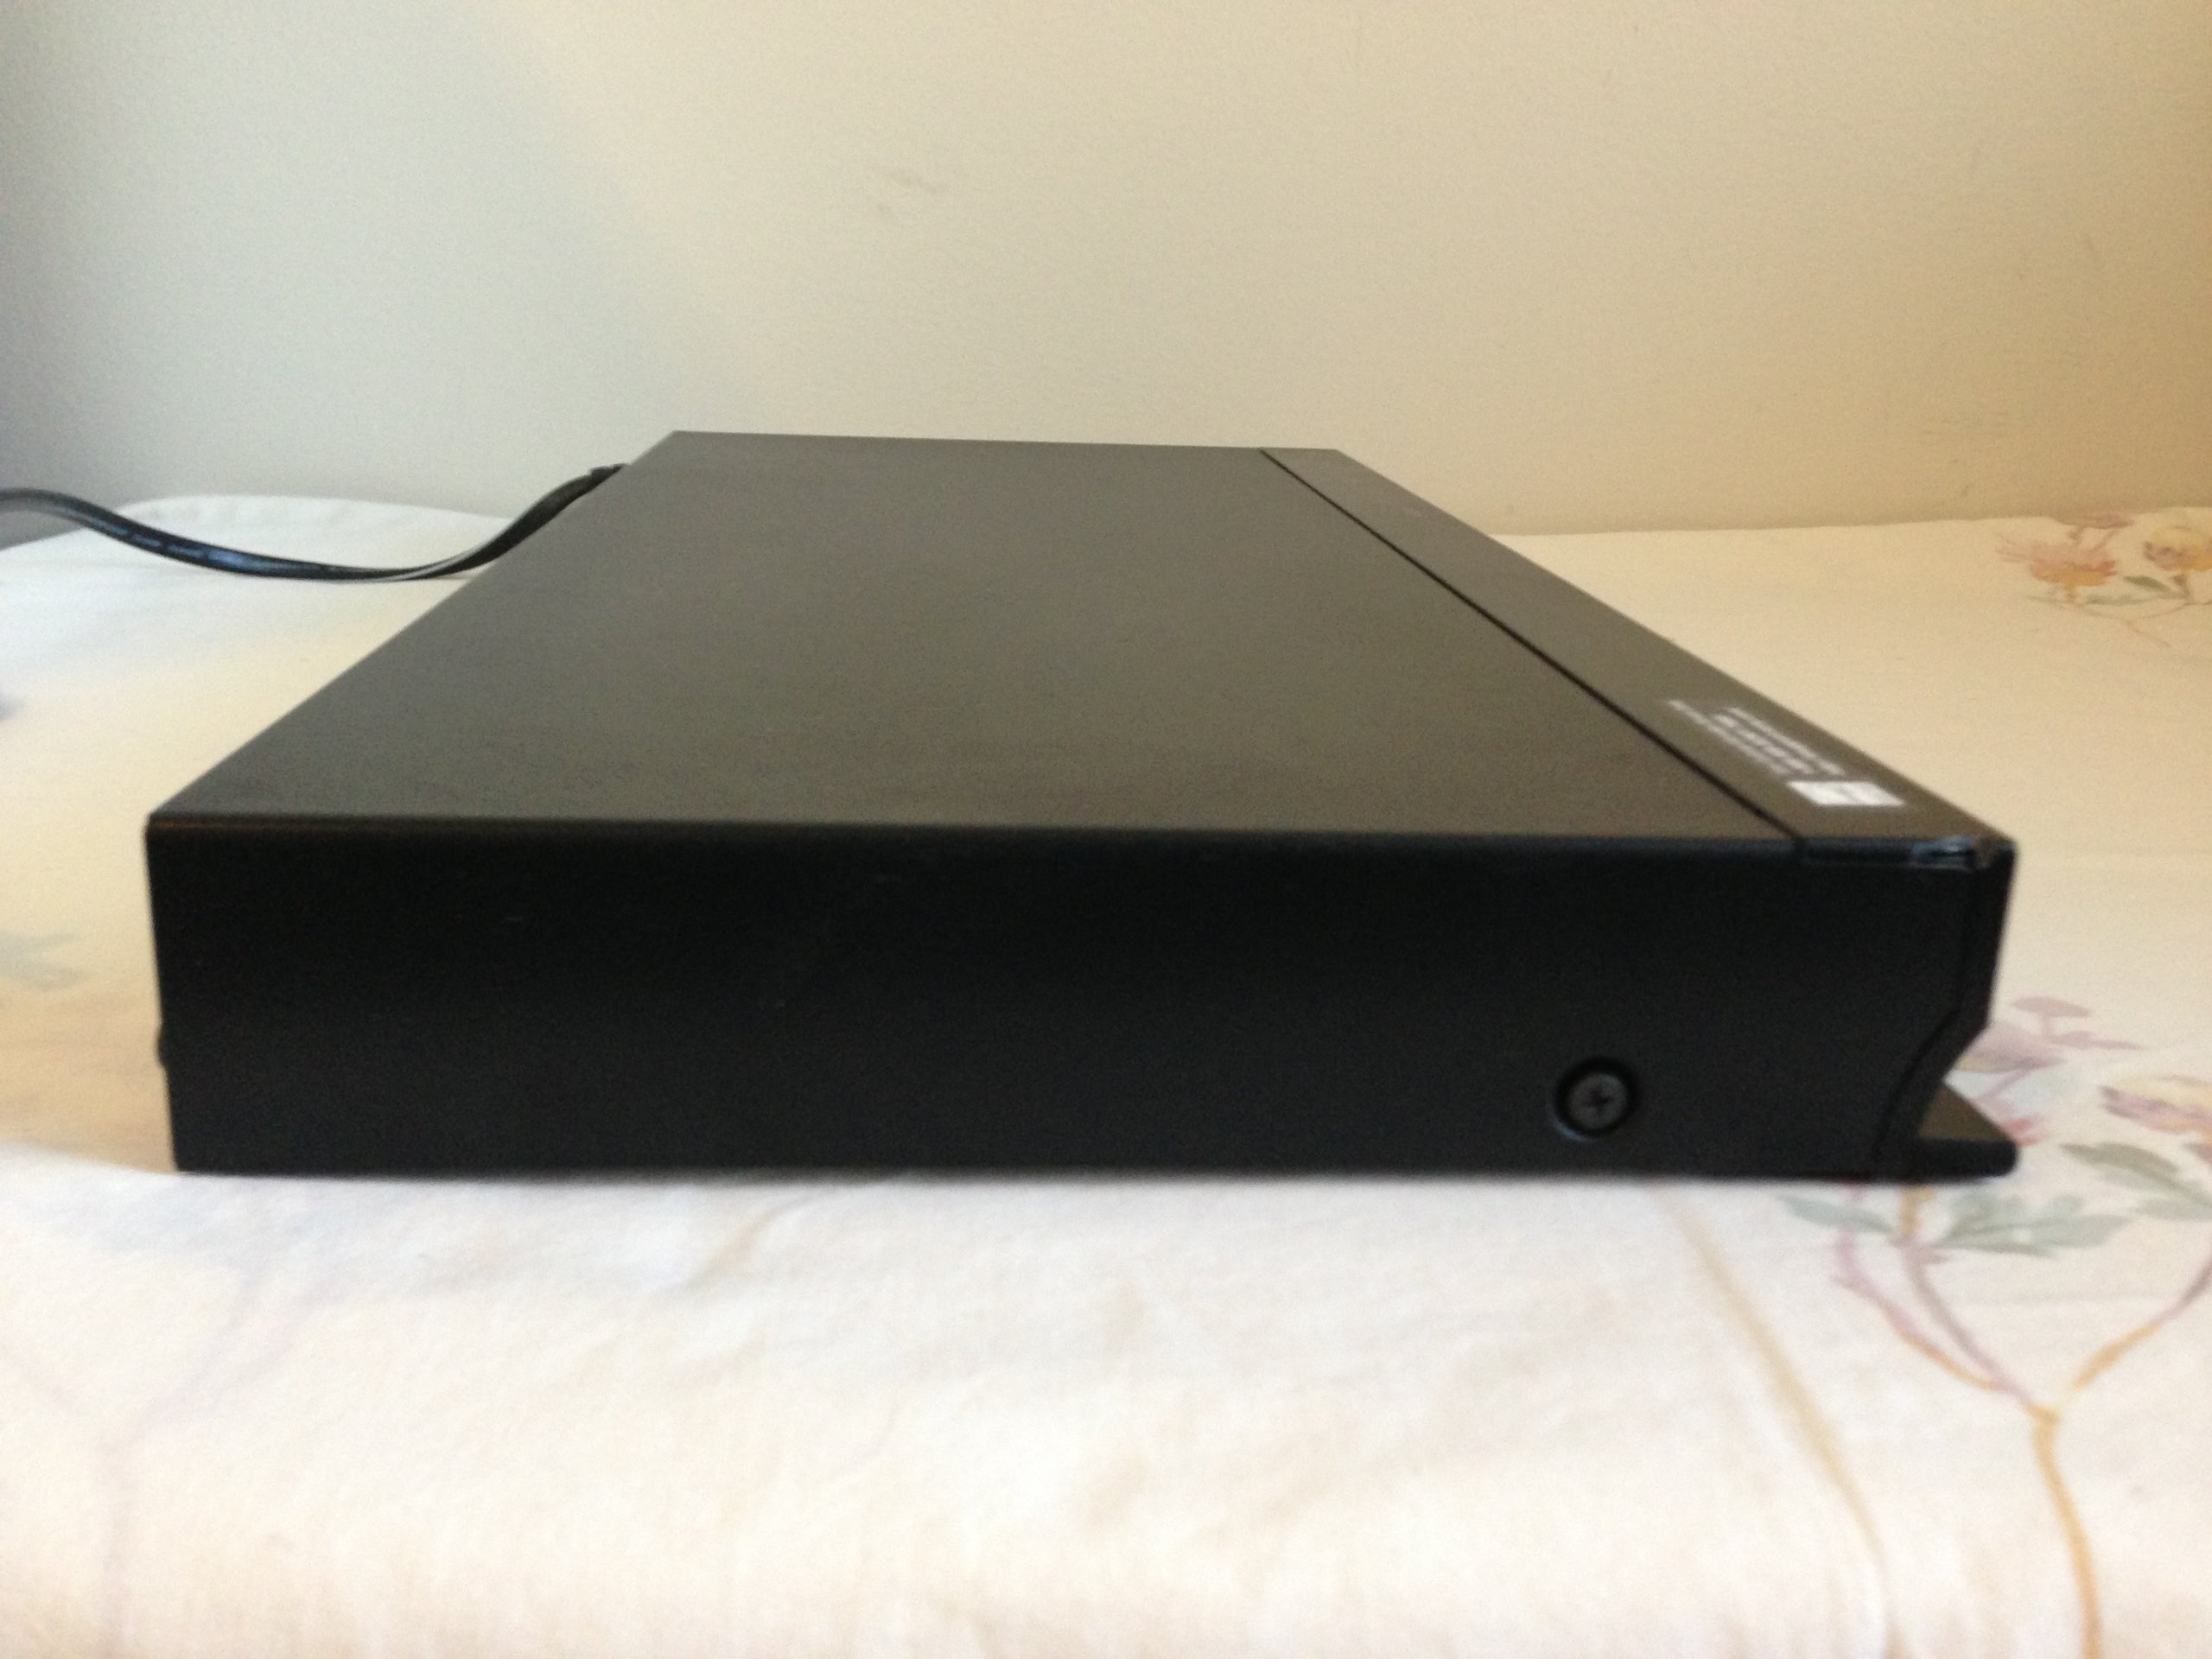 Sony BDP-S570 3D Blu-ray Disc Player (2010 Model)